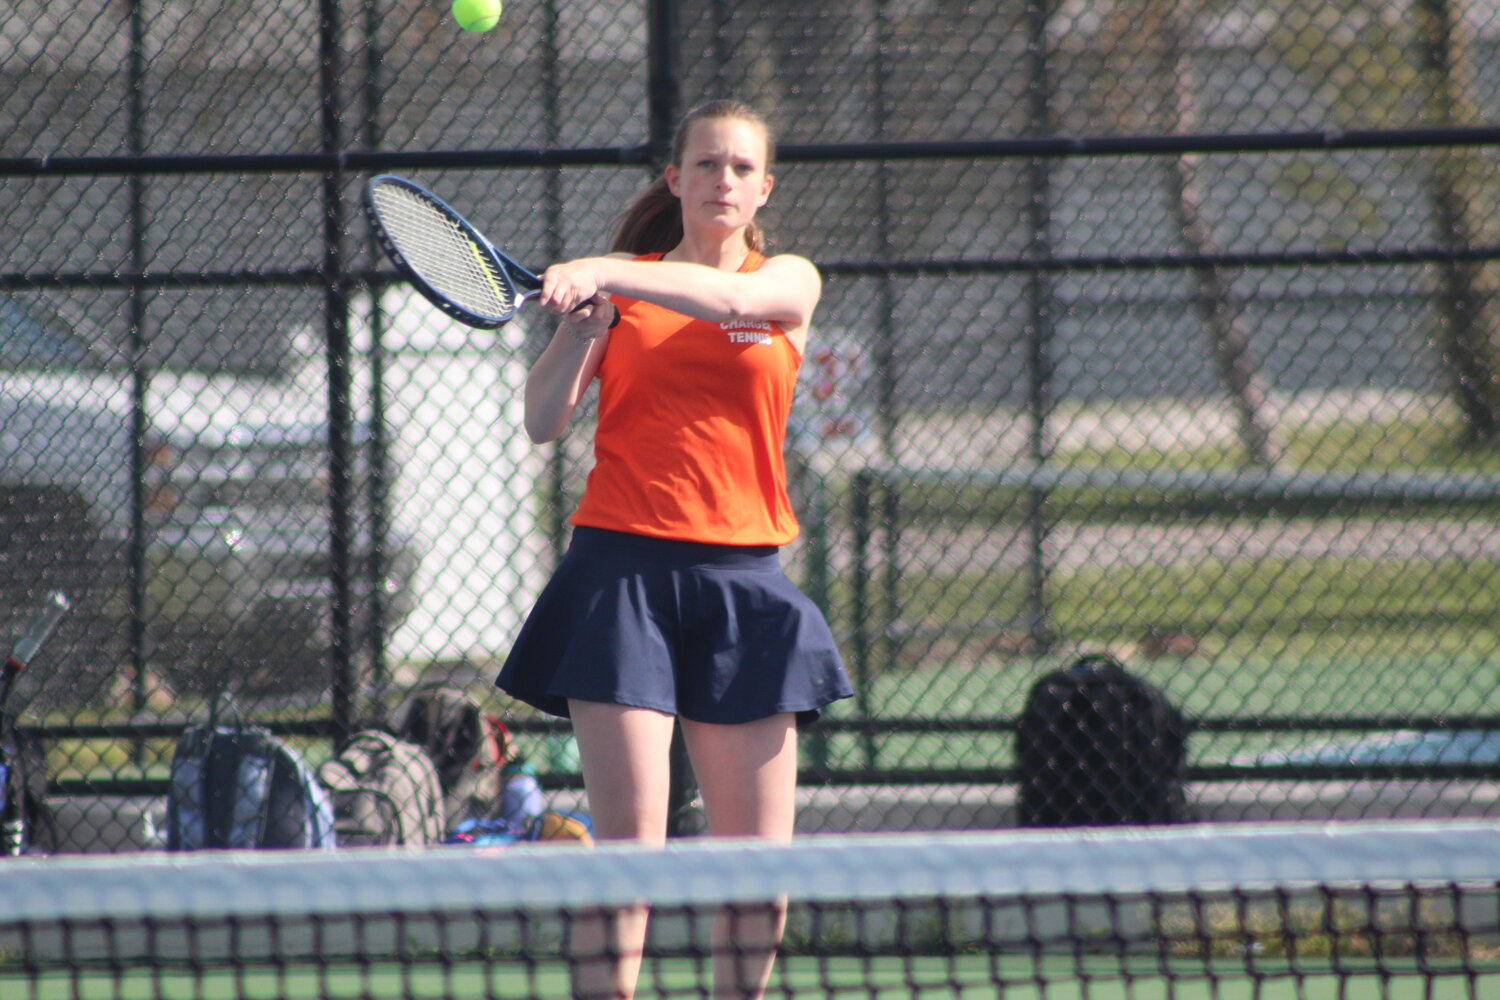 Kate Merica has has been a very nice bright spot for the Chargers at three singles in her freshman season.